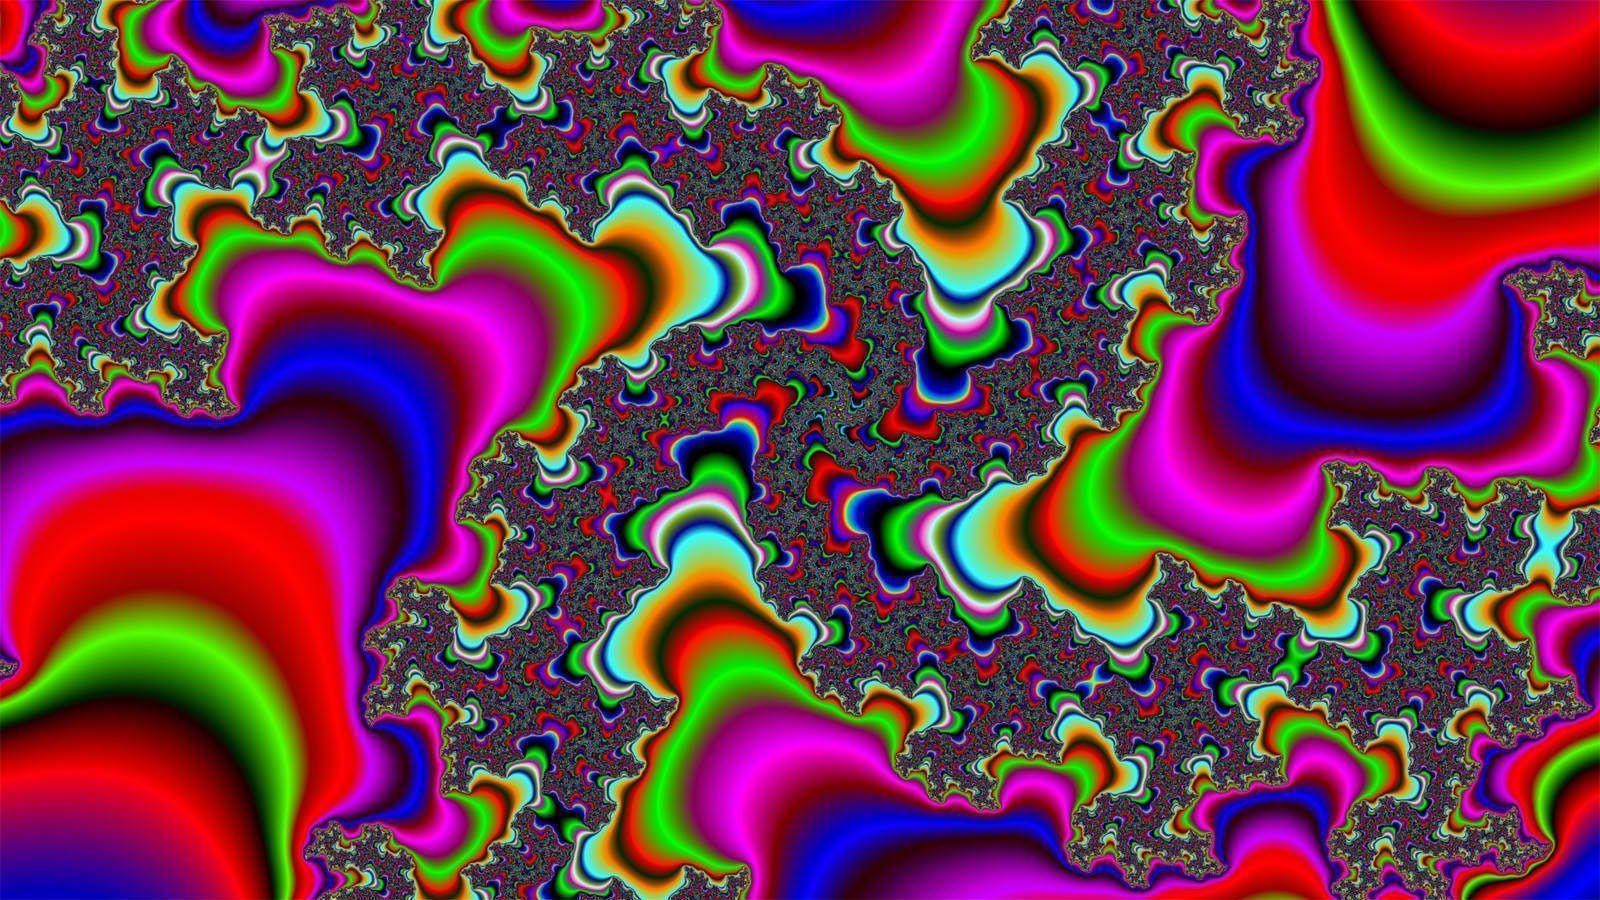 Trippy 3d Wallpapers 32735 Wallpapers HD.